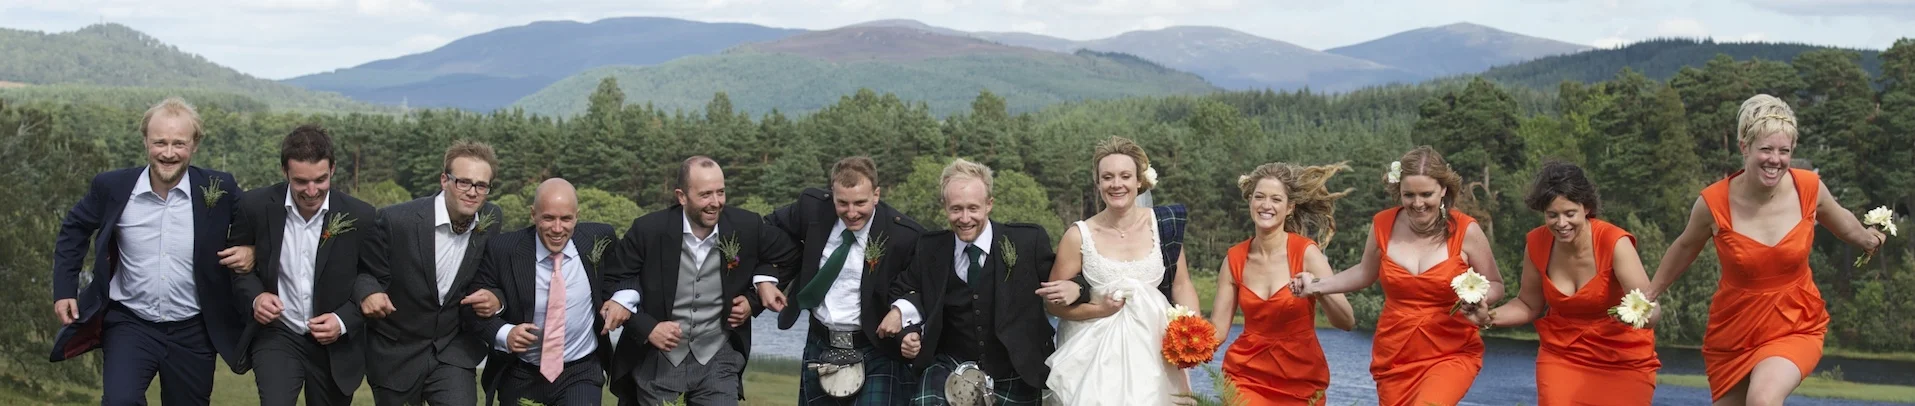 Wedding party running through heather, from Macdonald Hotels